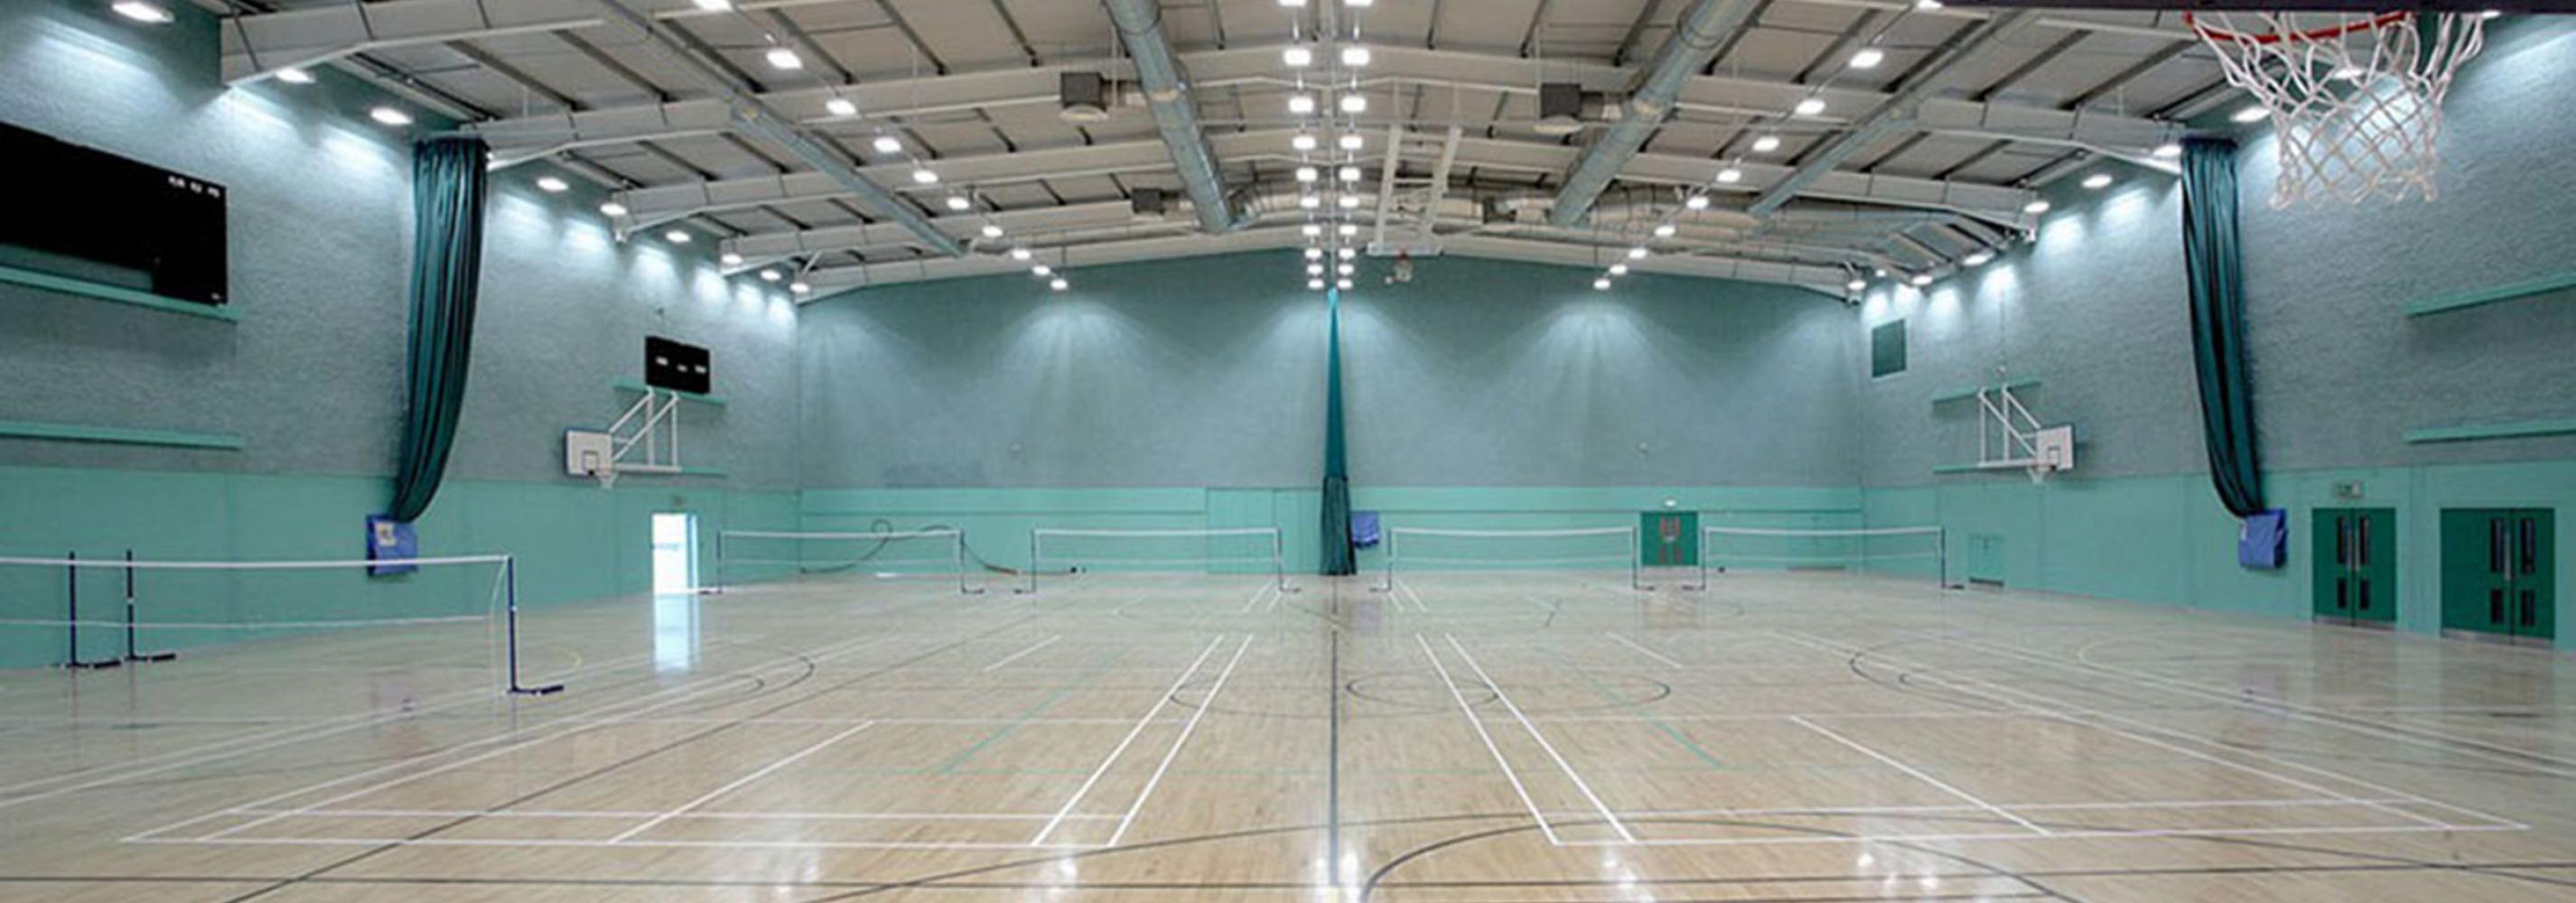 Free membership to Medway Park (pictured) and swimming pool or Kent Sport when booking direct through University of Kent